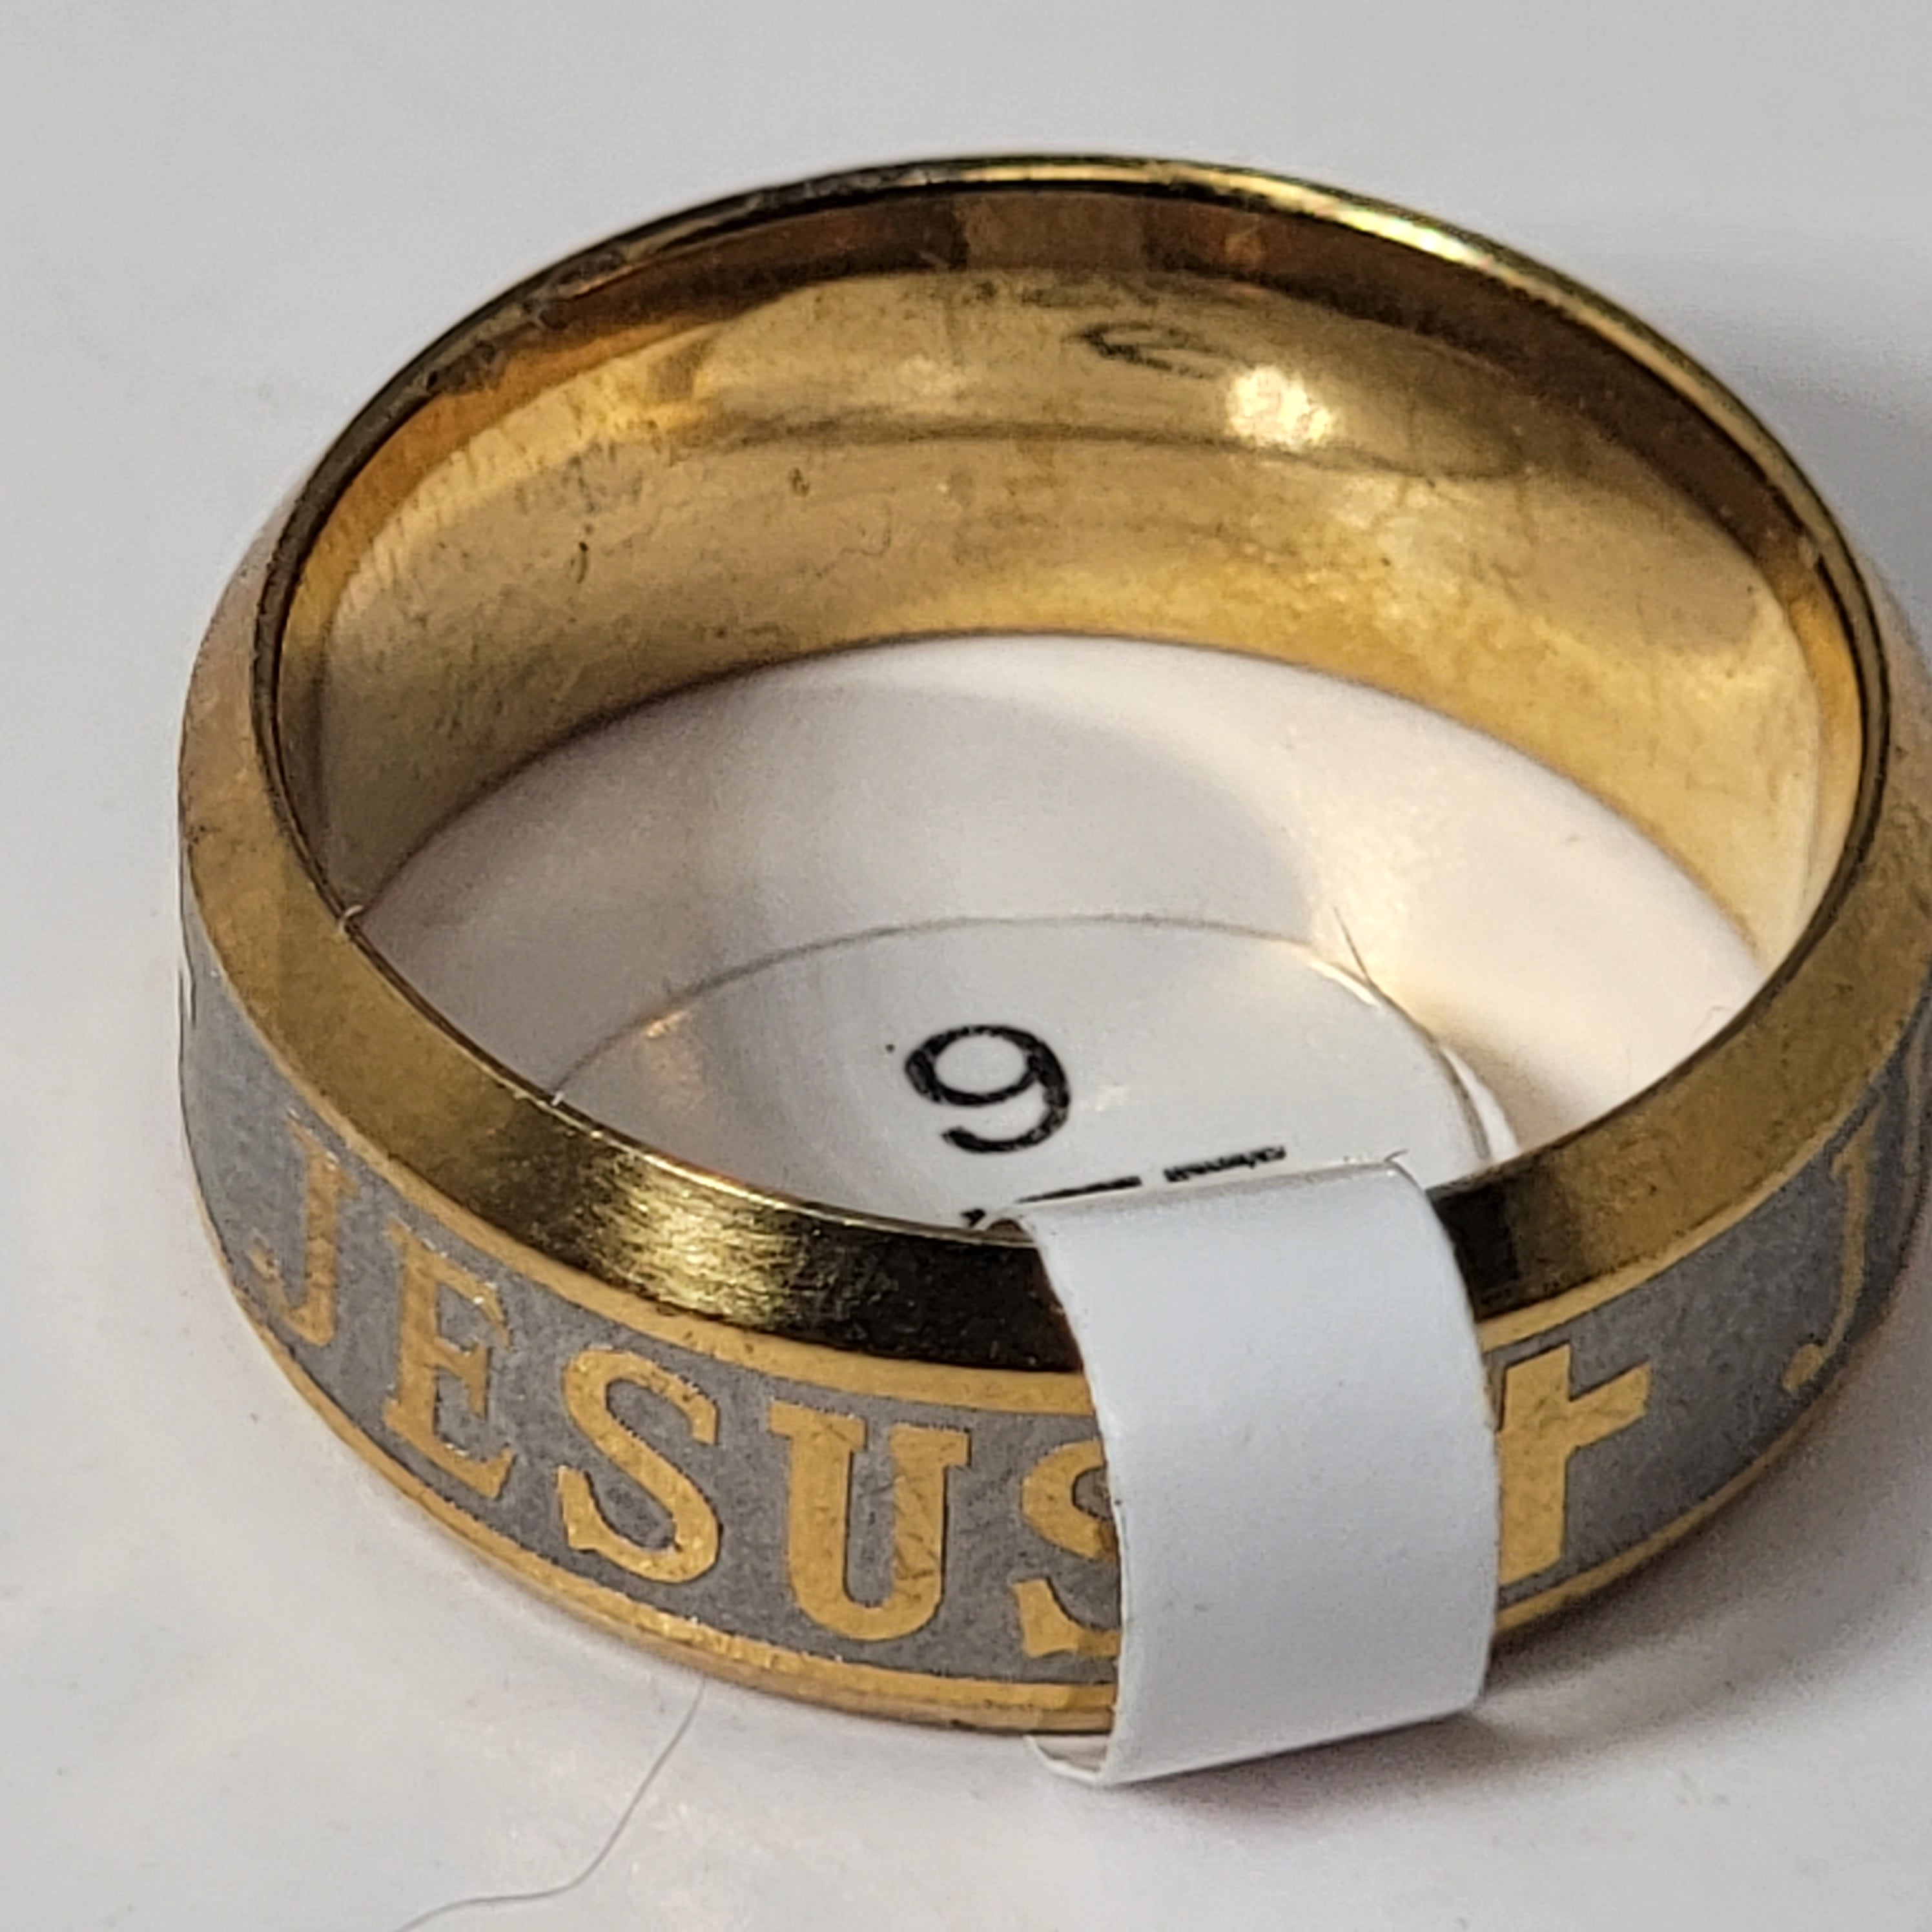 Jesus Cross Male/Women Ring Gold Color Stainless Steel Rings